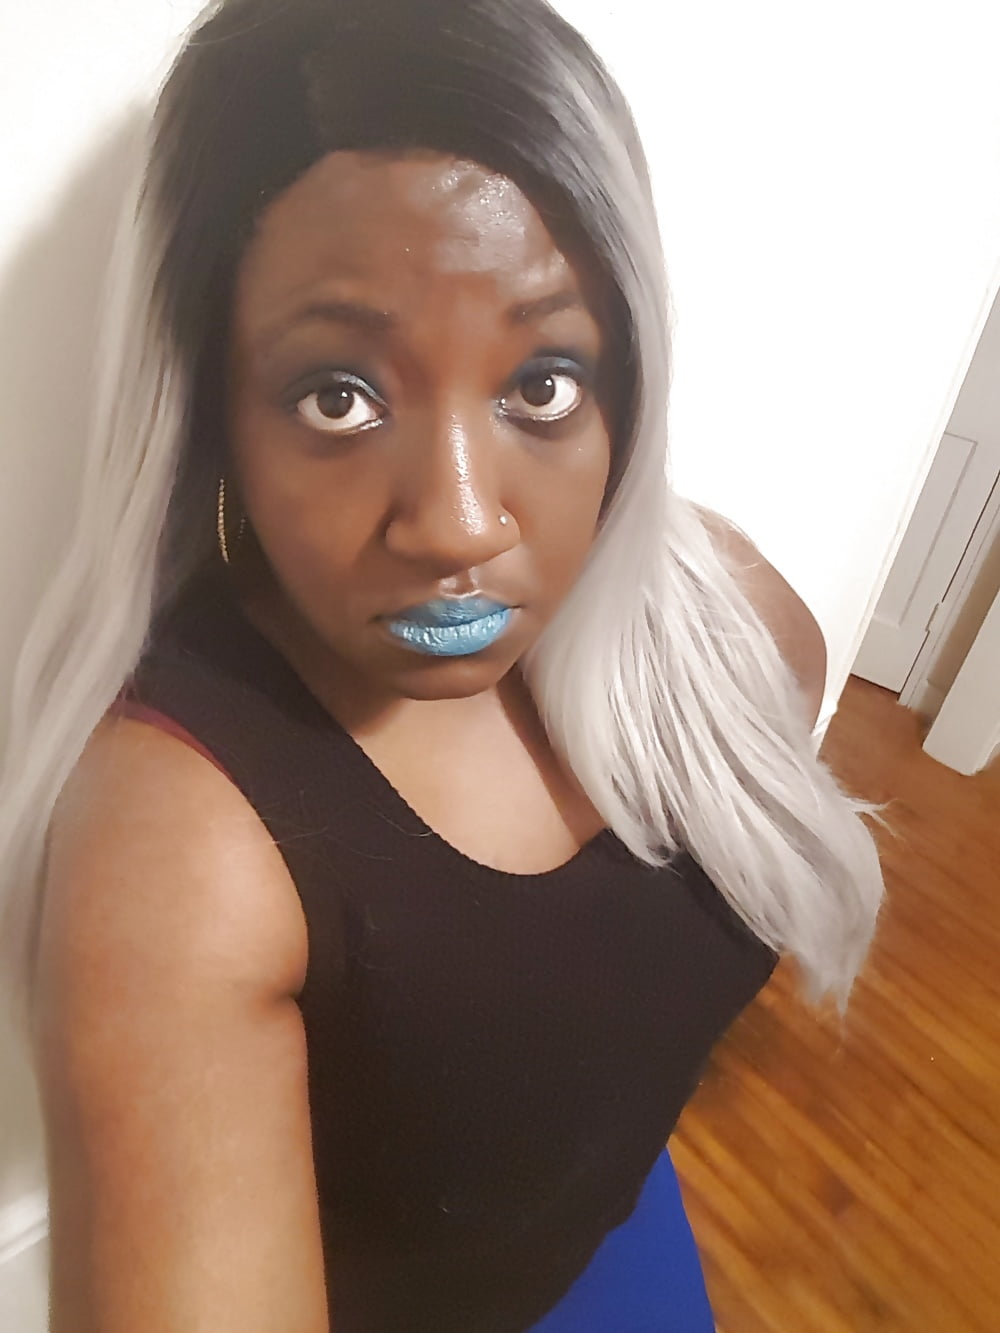 Blue Lipstick Porn - See and Save As blue lipstick porn pict - 4crot.com